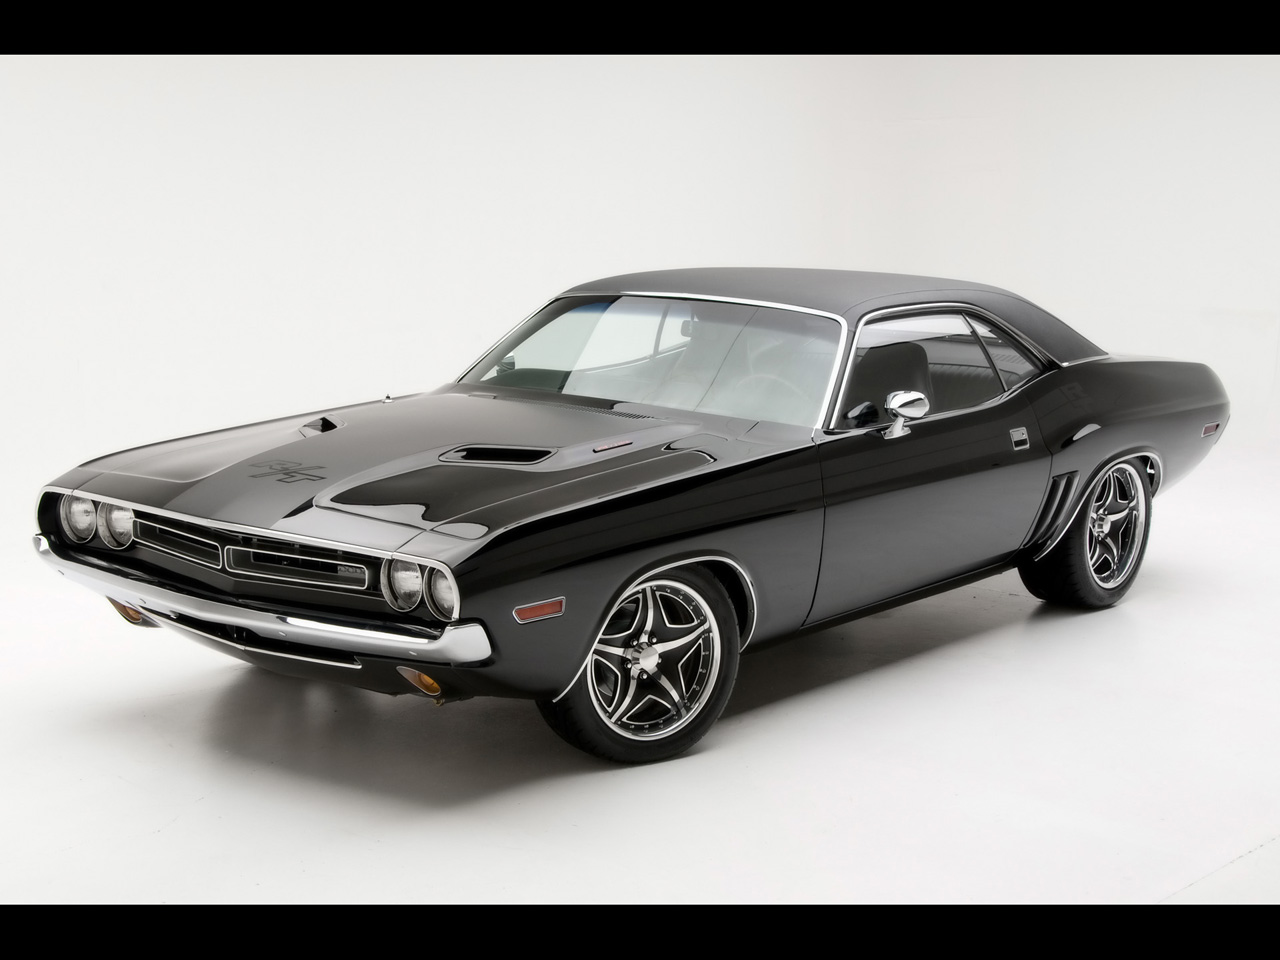 Hd Car wallpapers cool muscle cars wallpaper